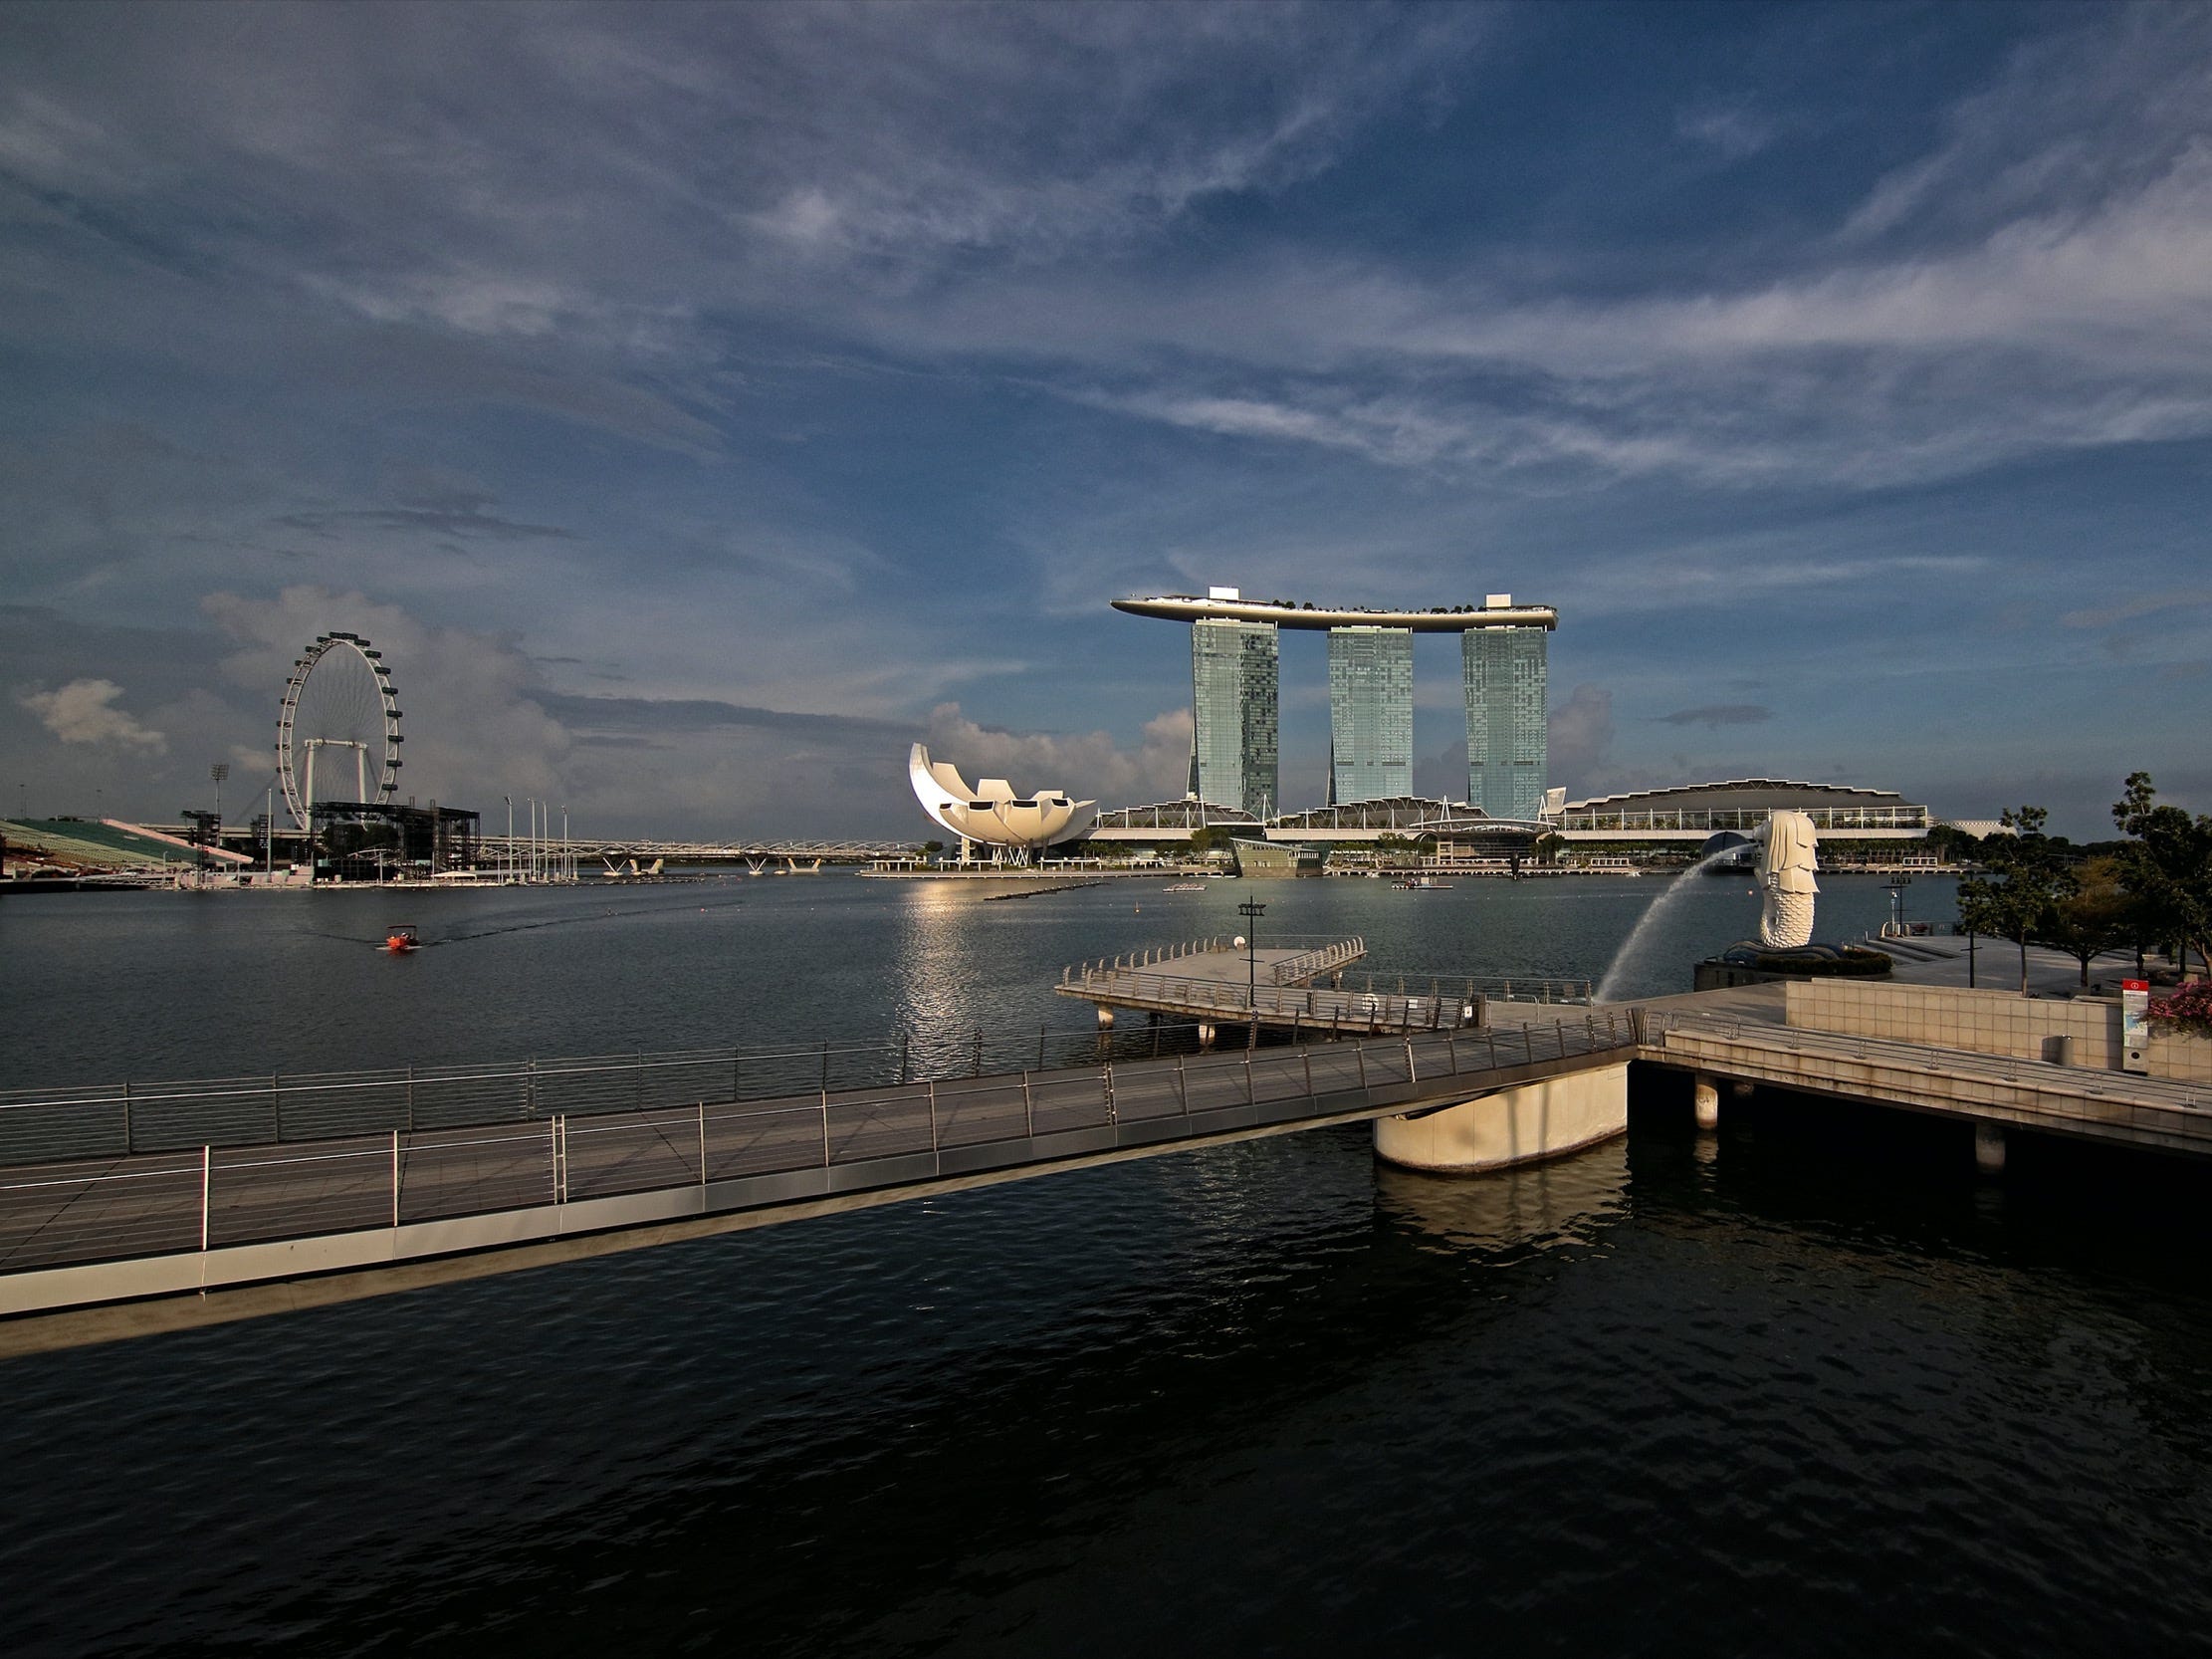 view of the Singapore Flyer, Marina Bay Sands, an empty Merlion Park and an empty bridge in singapore